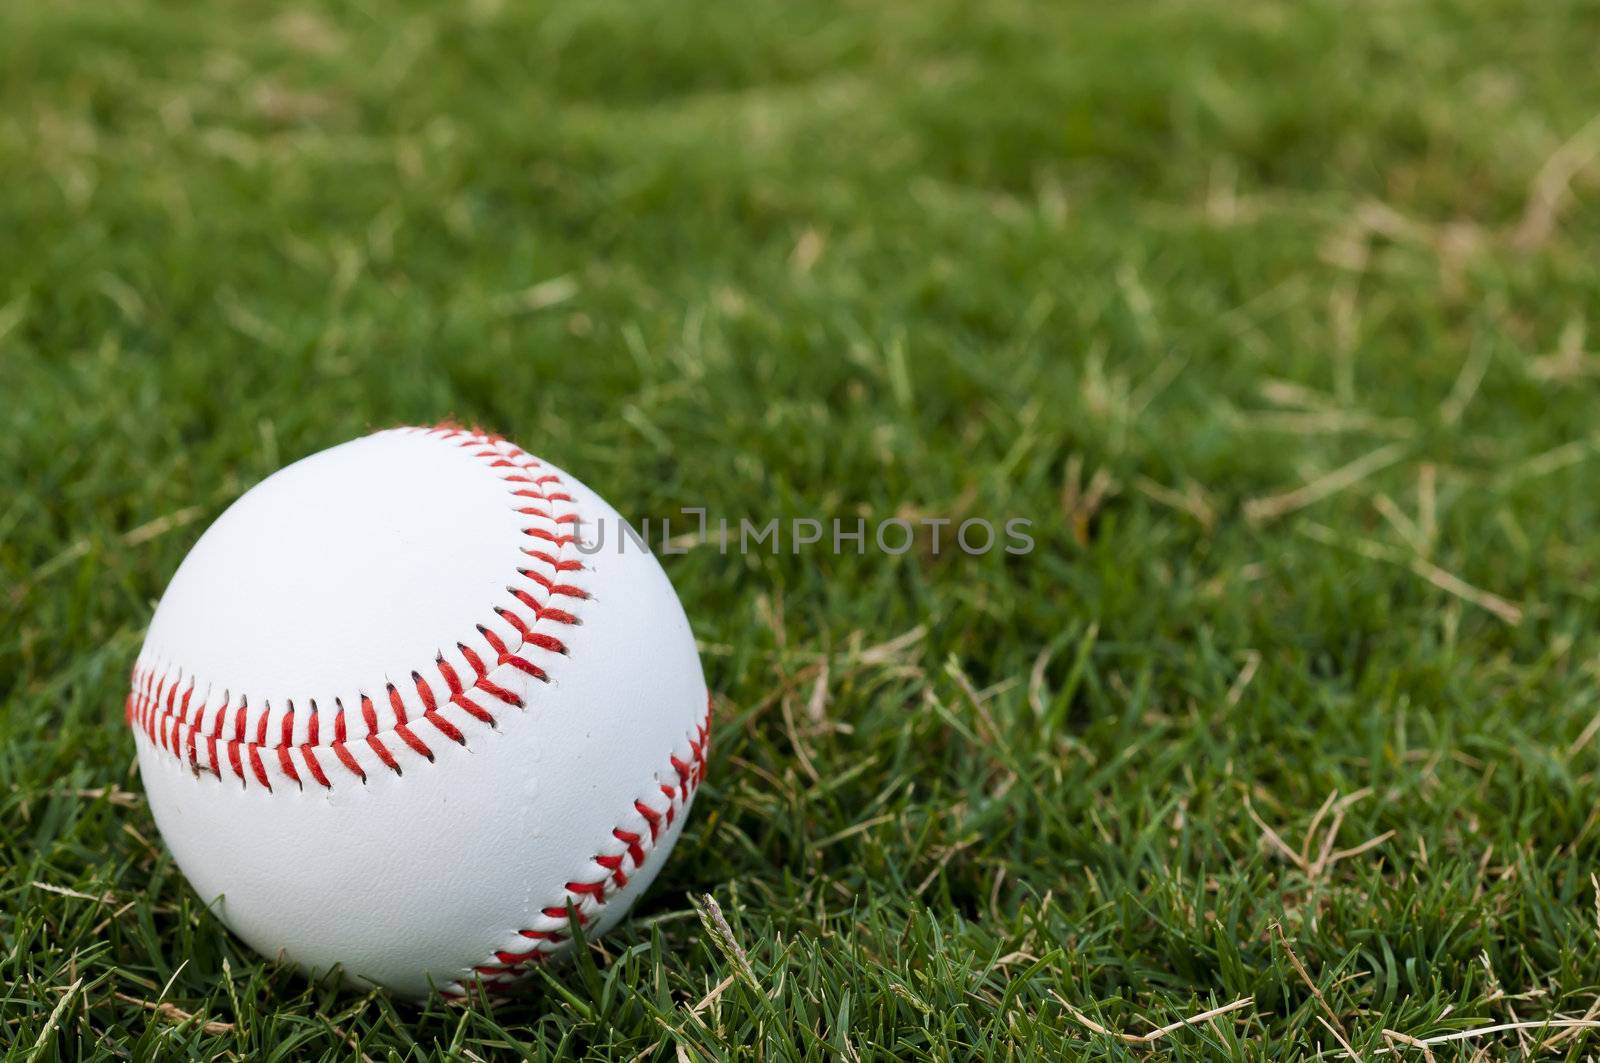 Closeup of baseball on grass with copy space.